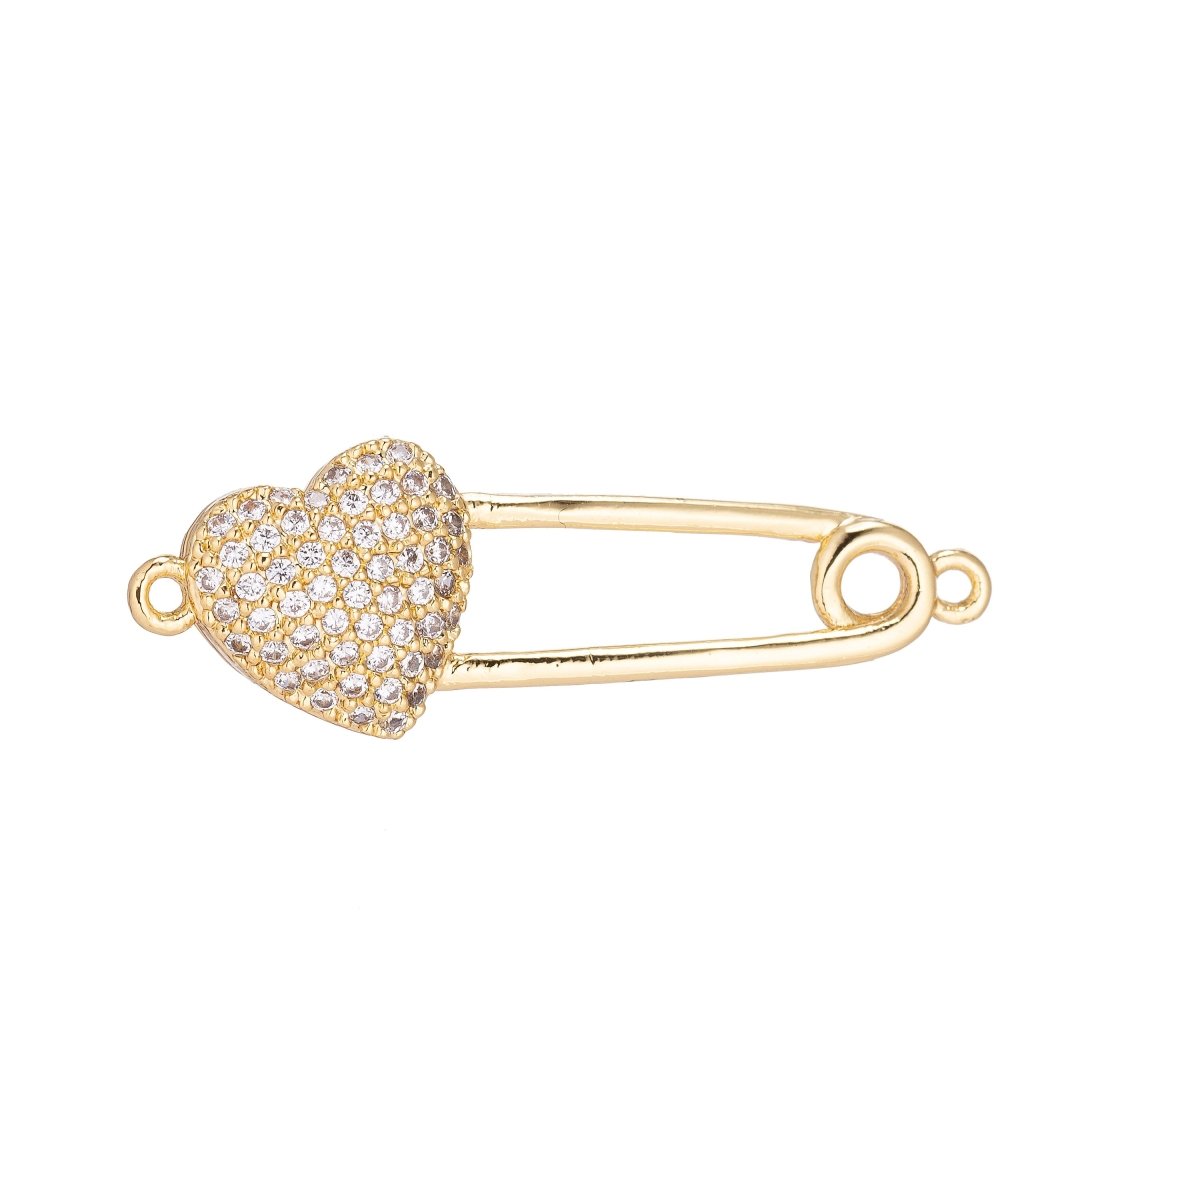 18K Gold Filled Dainty Delicate Safety Pin w/ Love Heart Cubic Zirconia Bracelet Charm Bead Finding Connector for Earring Jewelry Making F-092 - DLUXCA